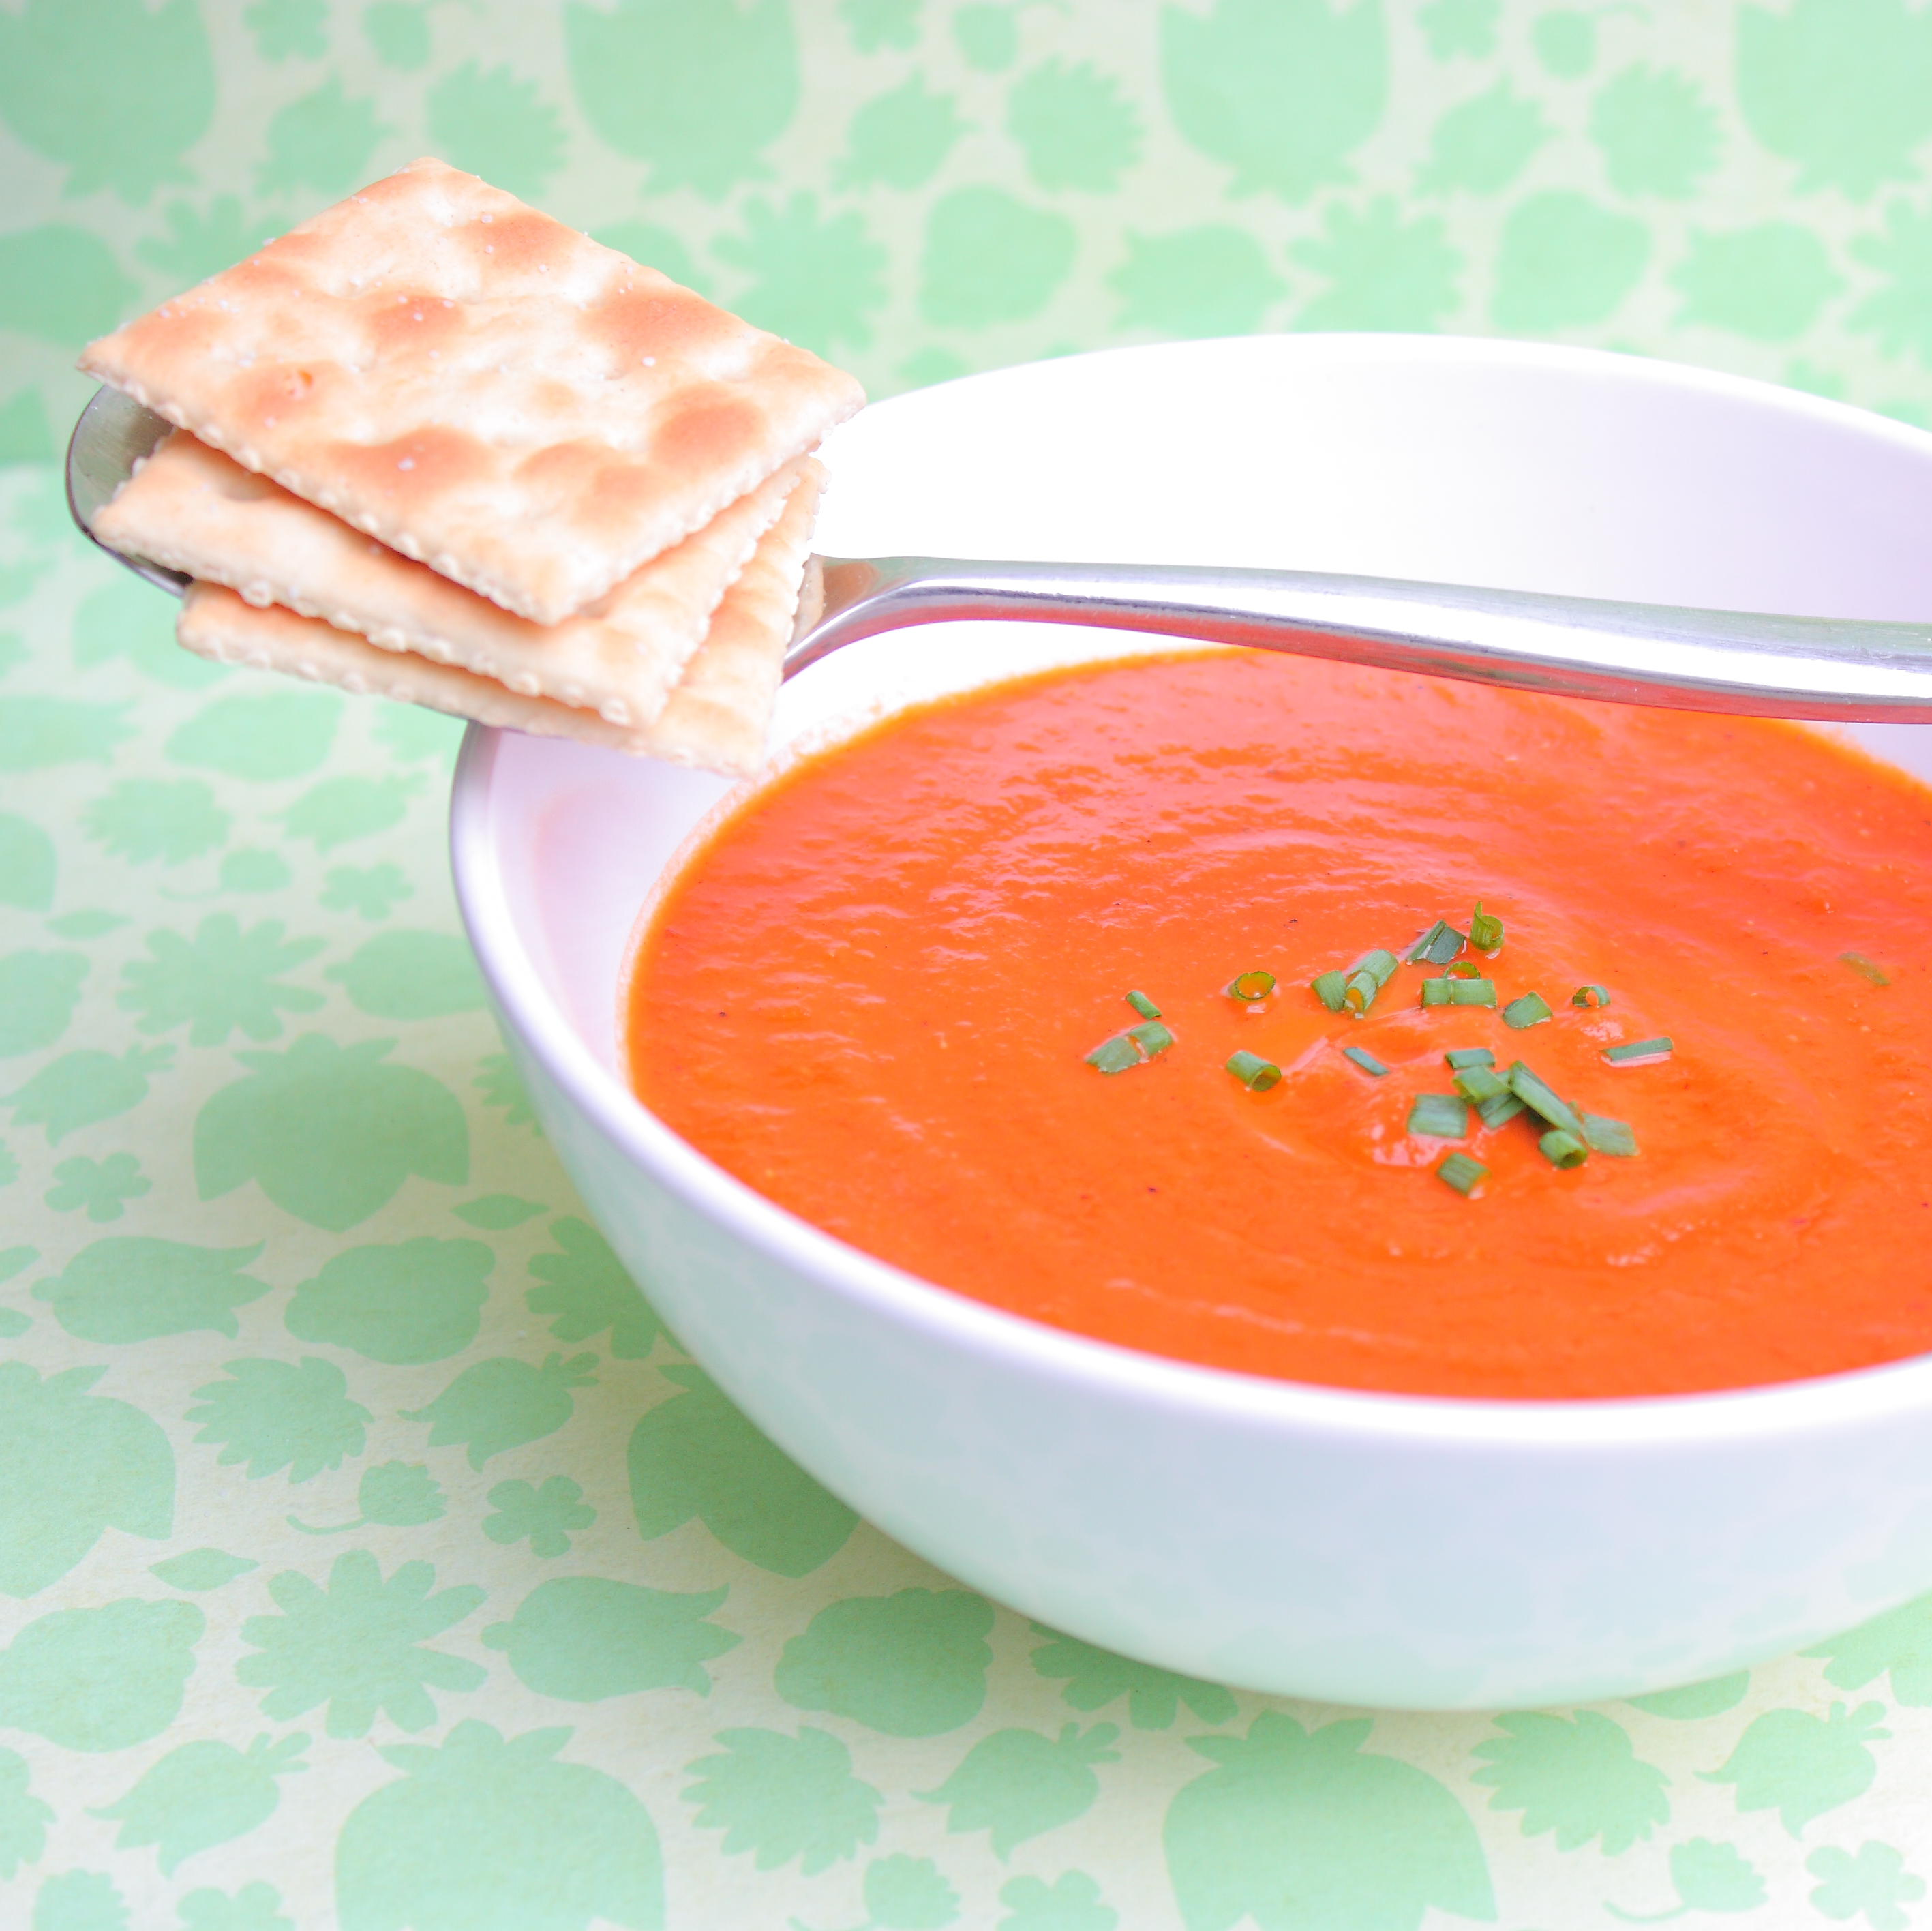 Reduce the amount of sodium, sugar, and preservatives by making your own tomato soup, from alimentageuse.com